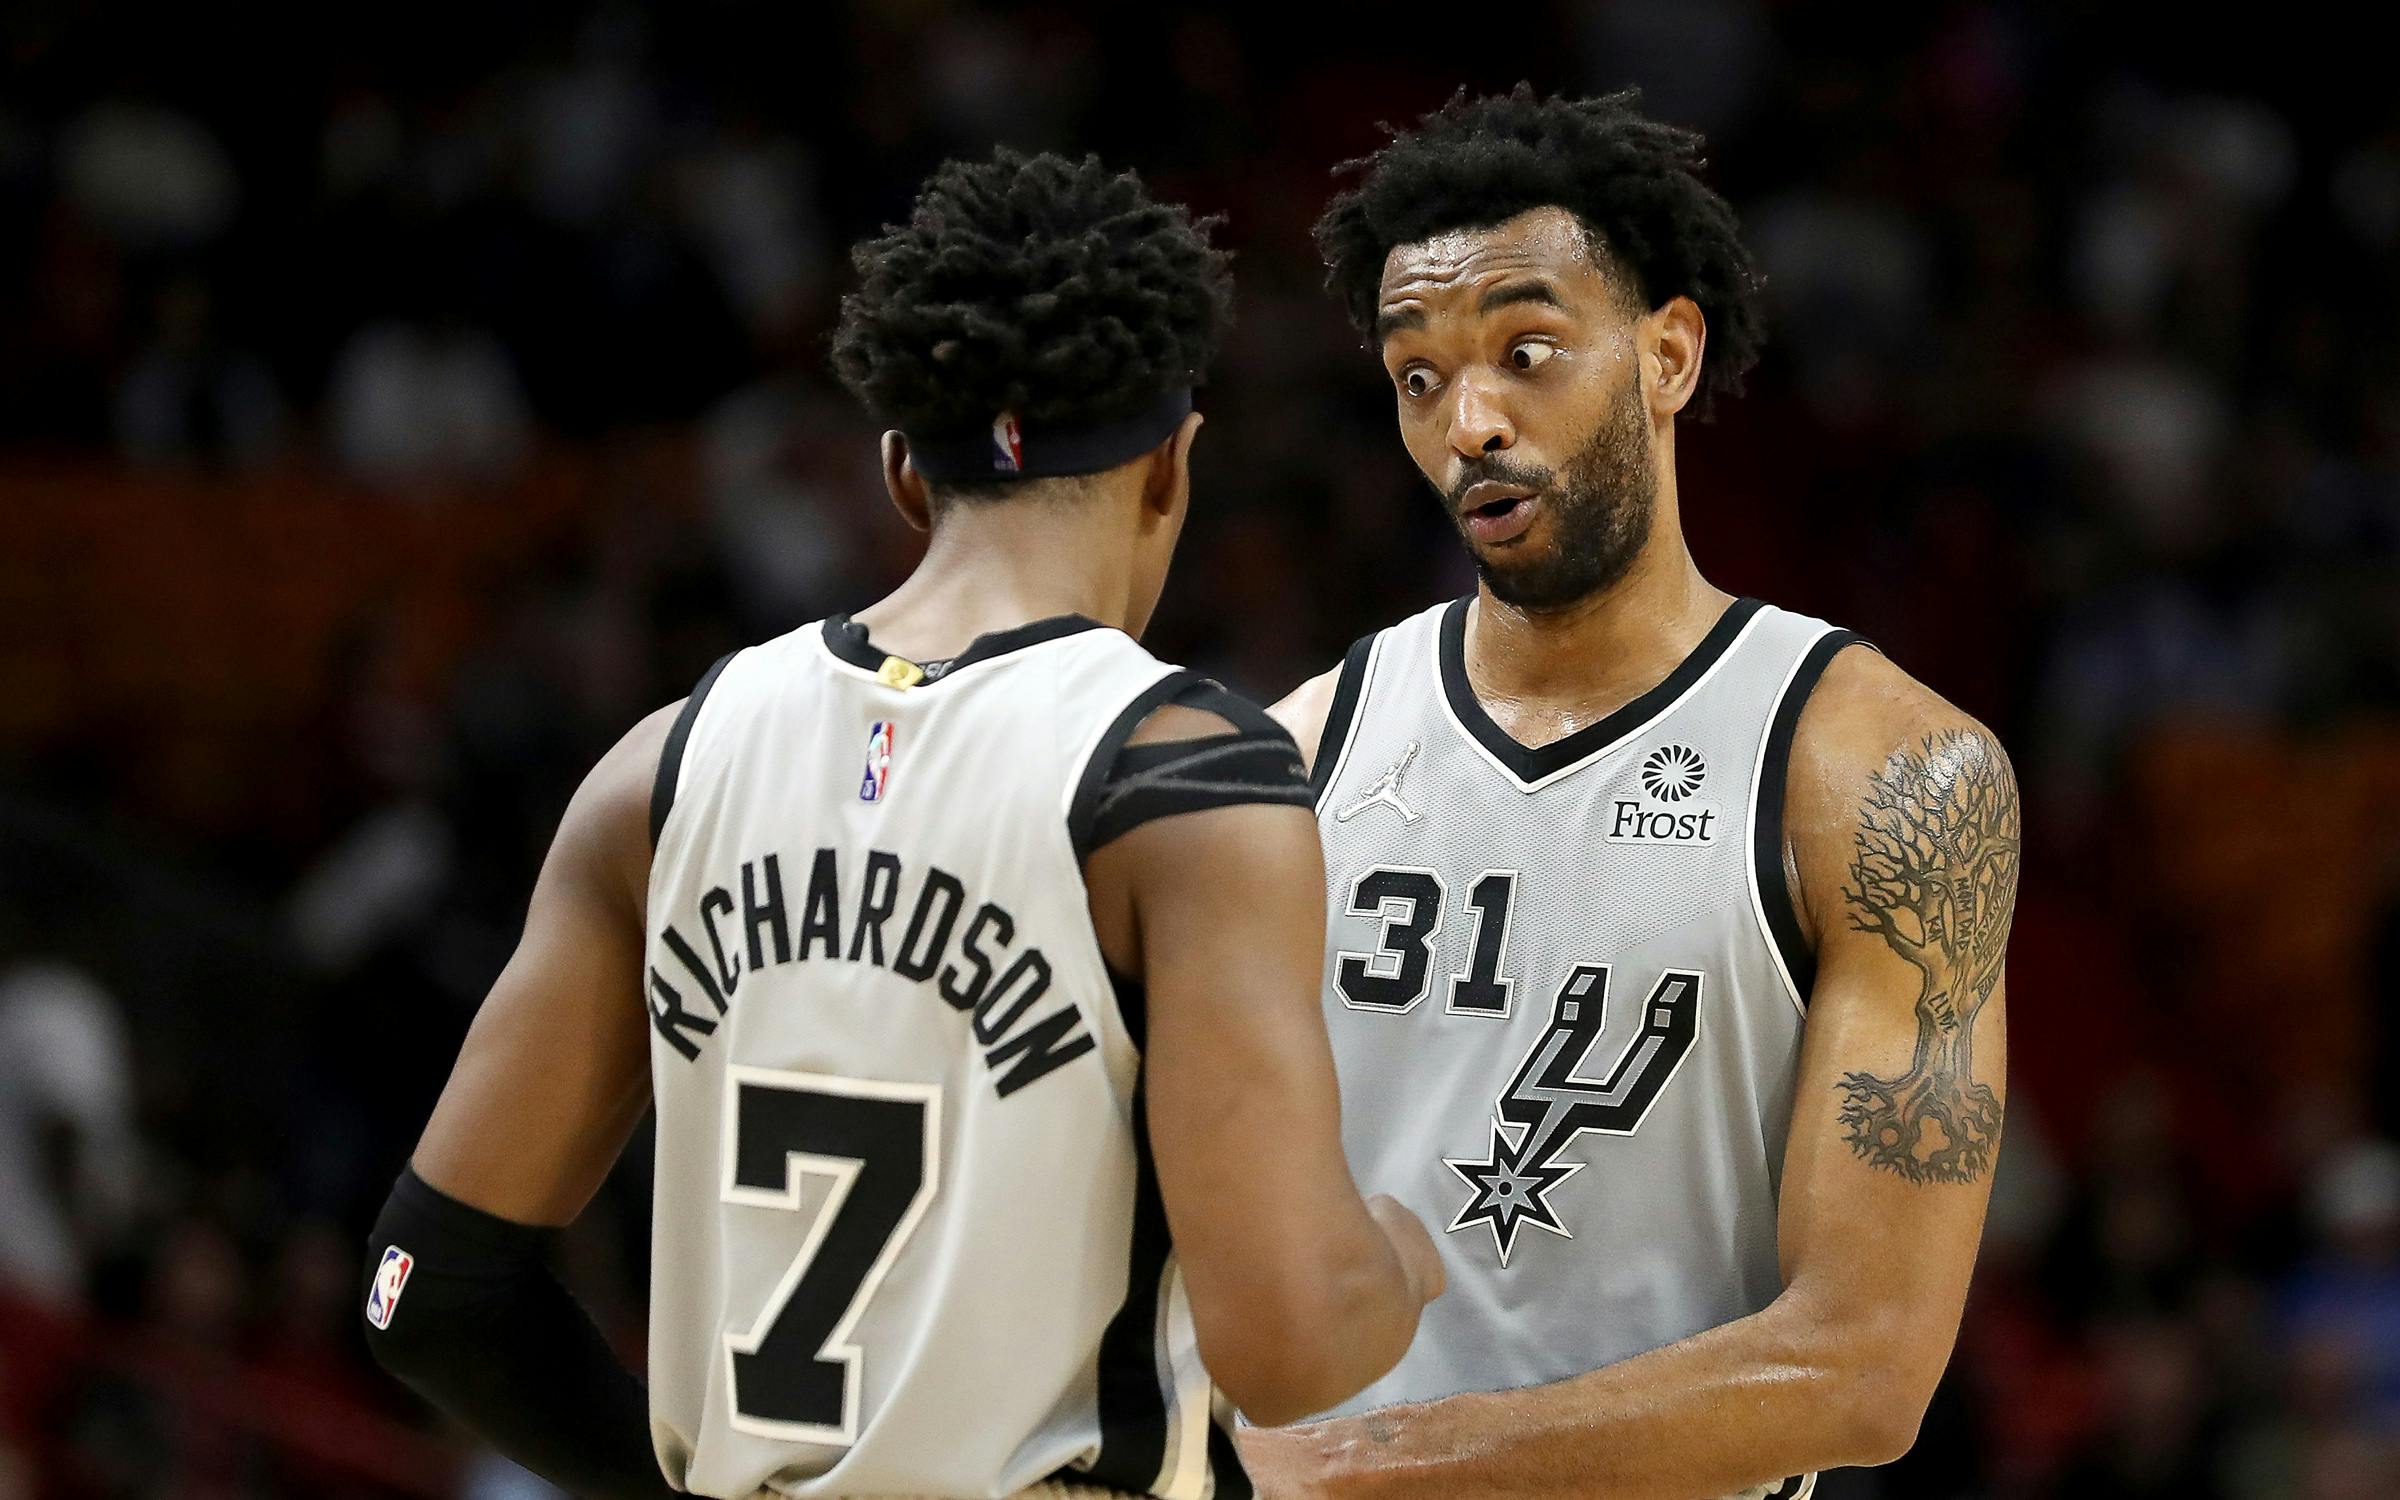 The San Antonio Spurs have some aging players, but have young talent, too